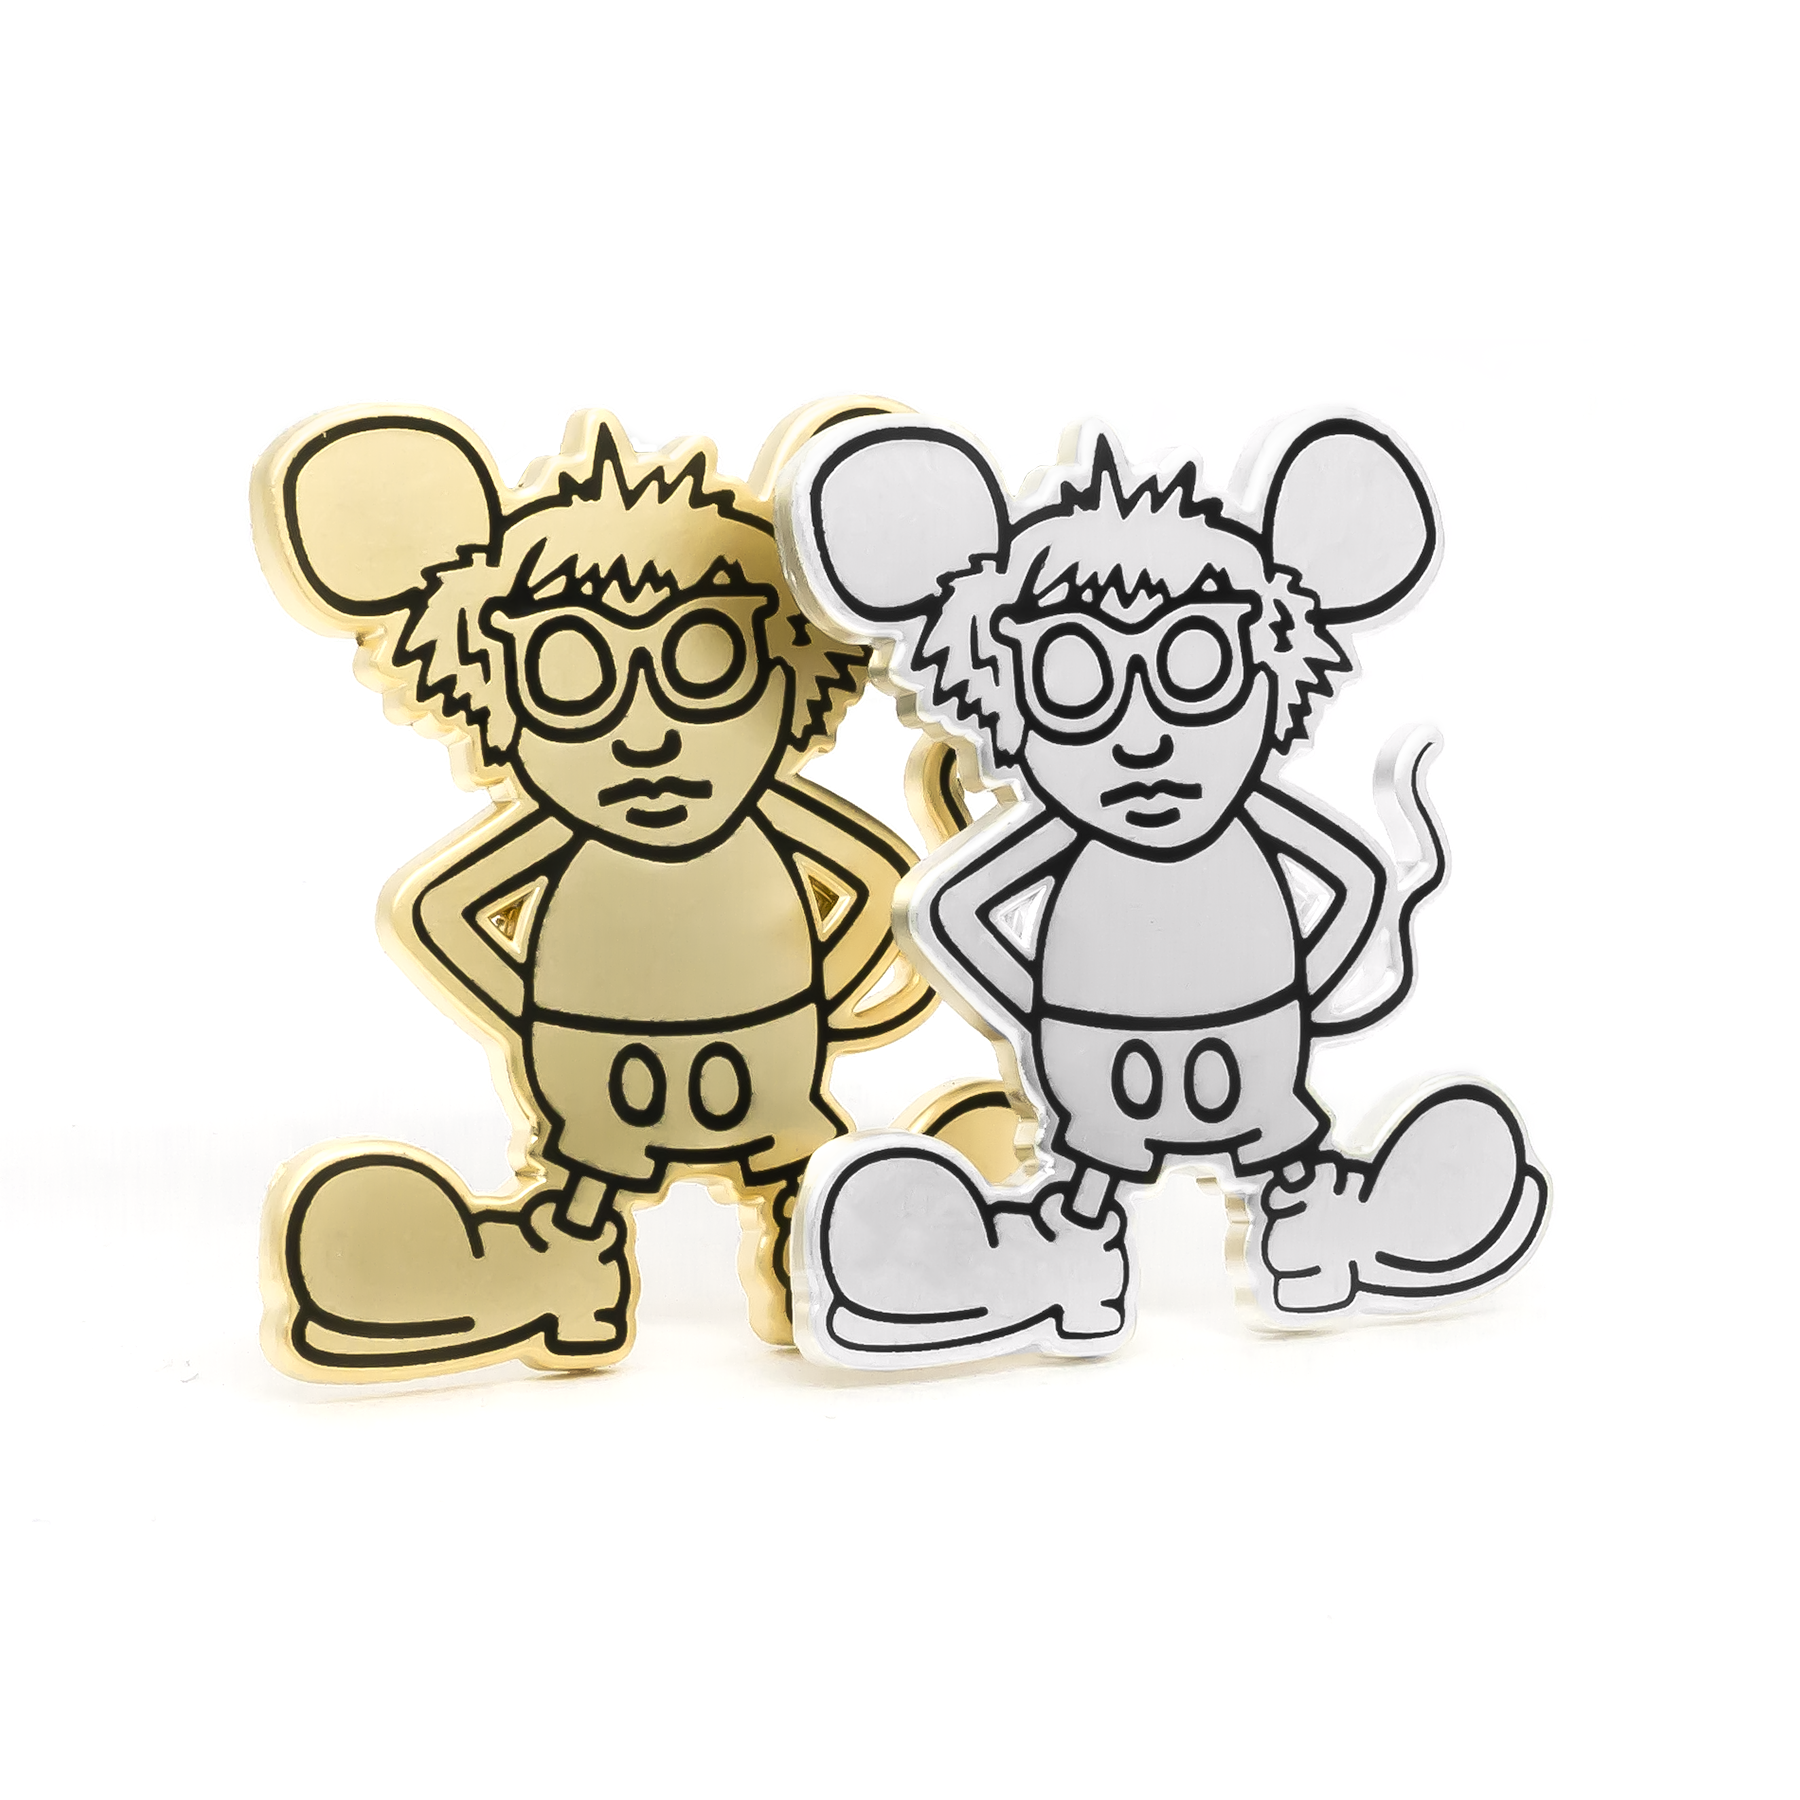 Andy Mouse (Museum Edition) enamel pin